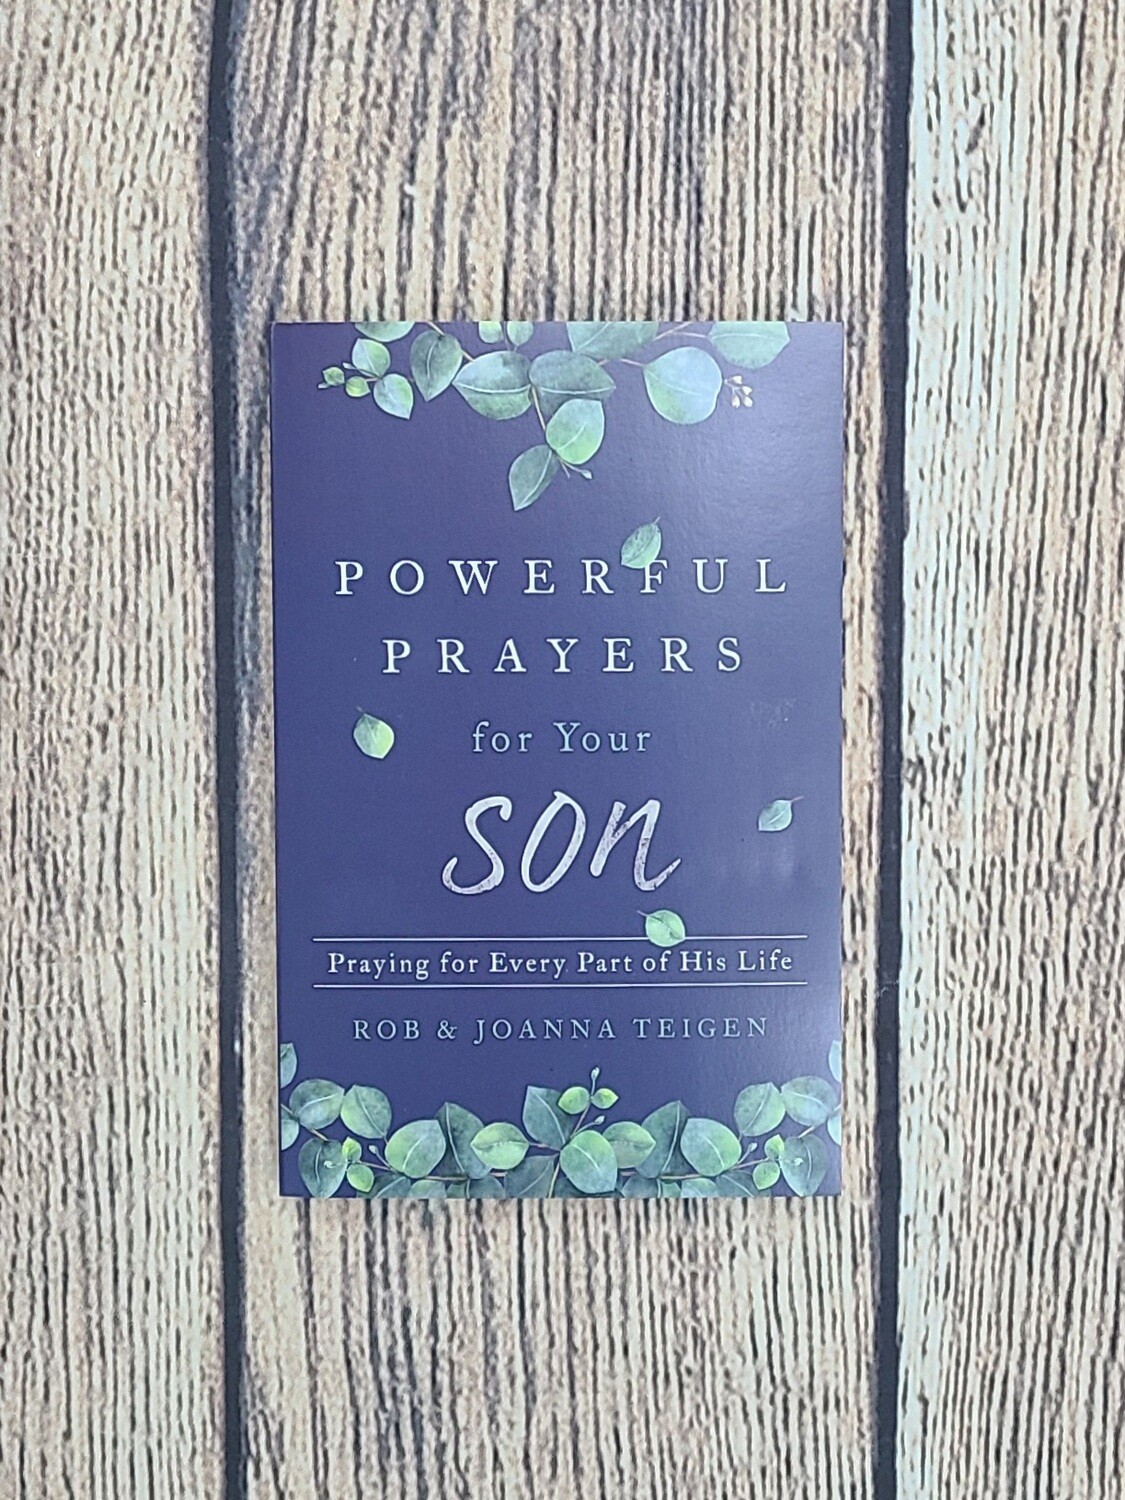 Powerful Prayers for Your Son by Rob and Joanna Teigen